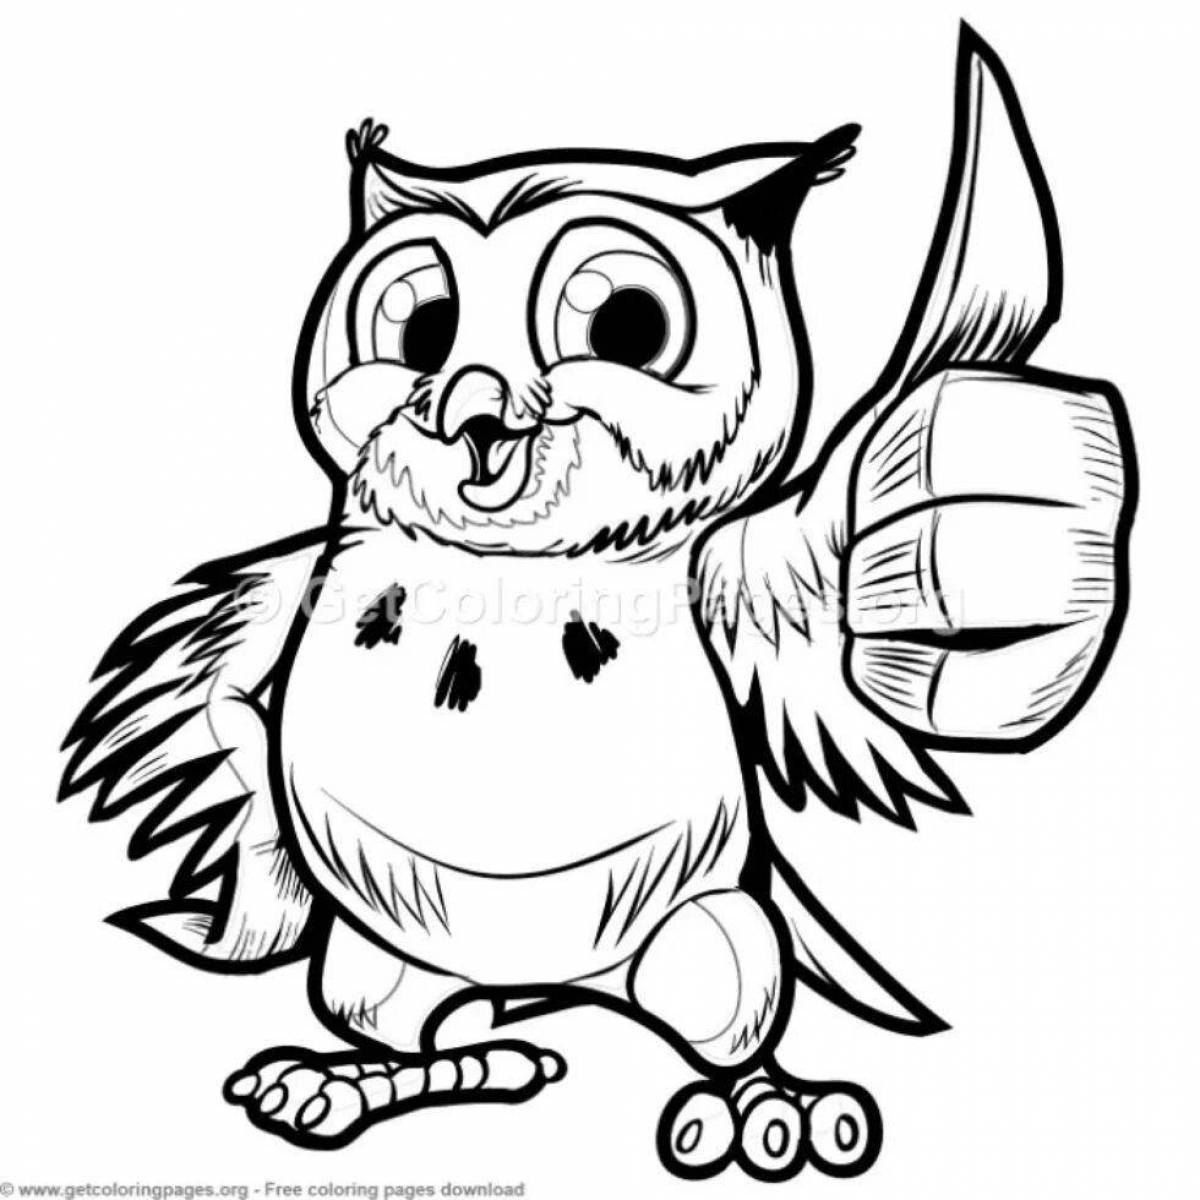 Fancy wise owl coloring book for kids